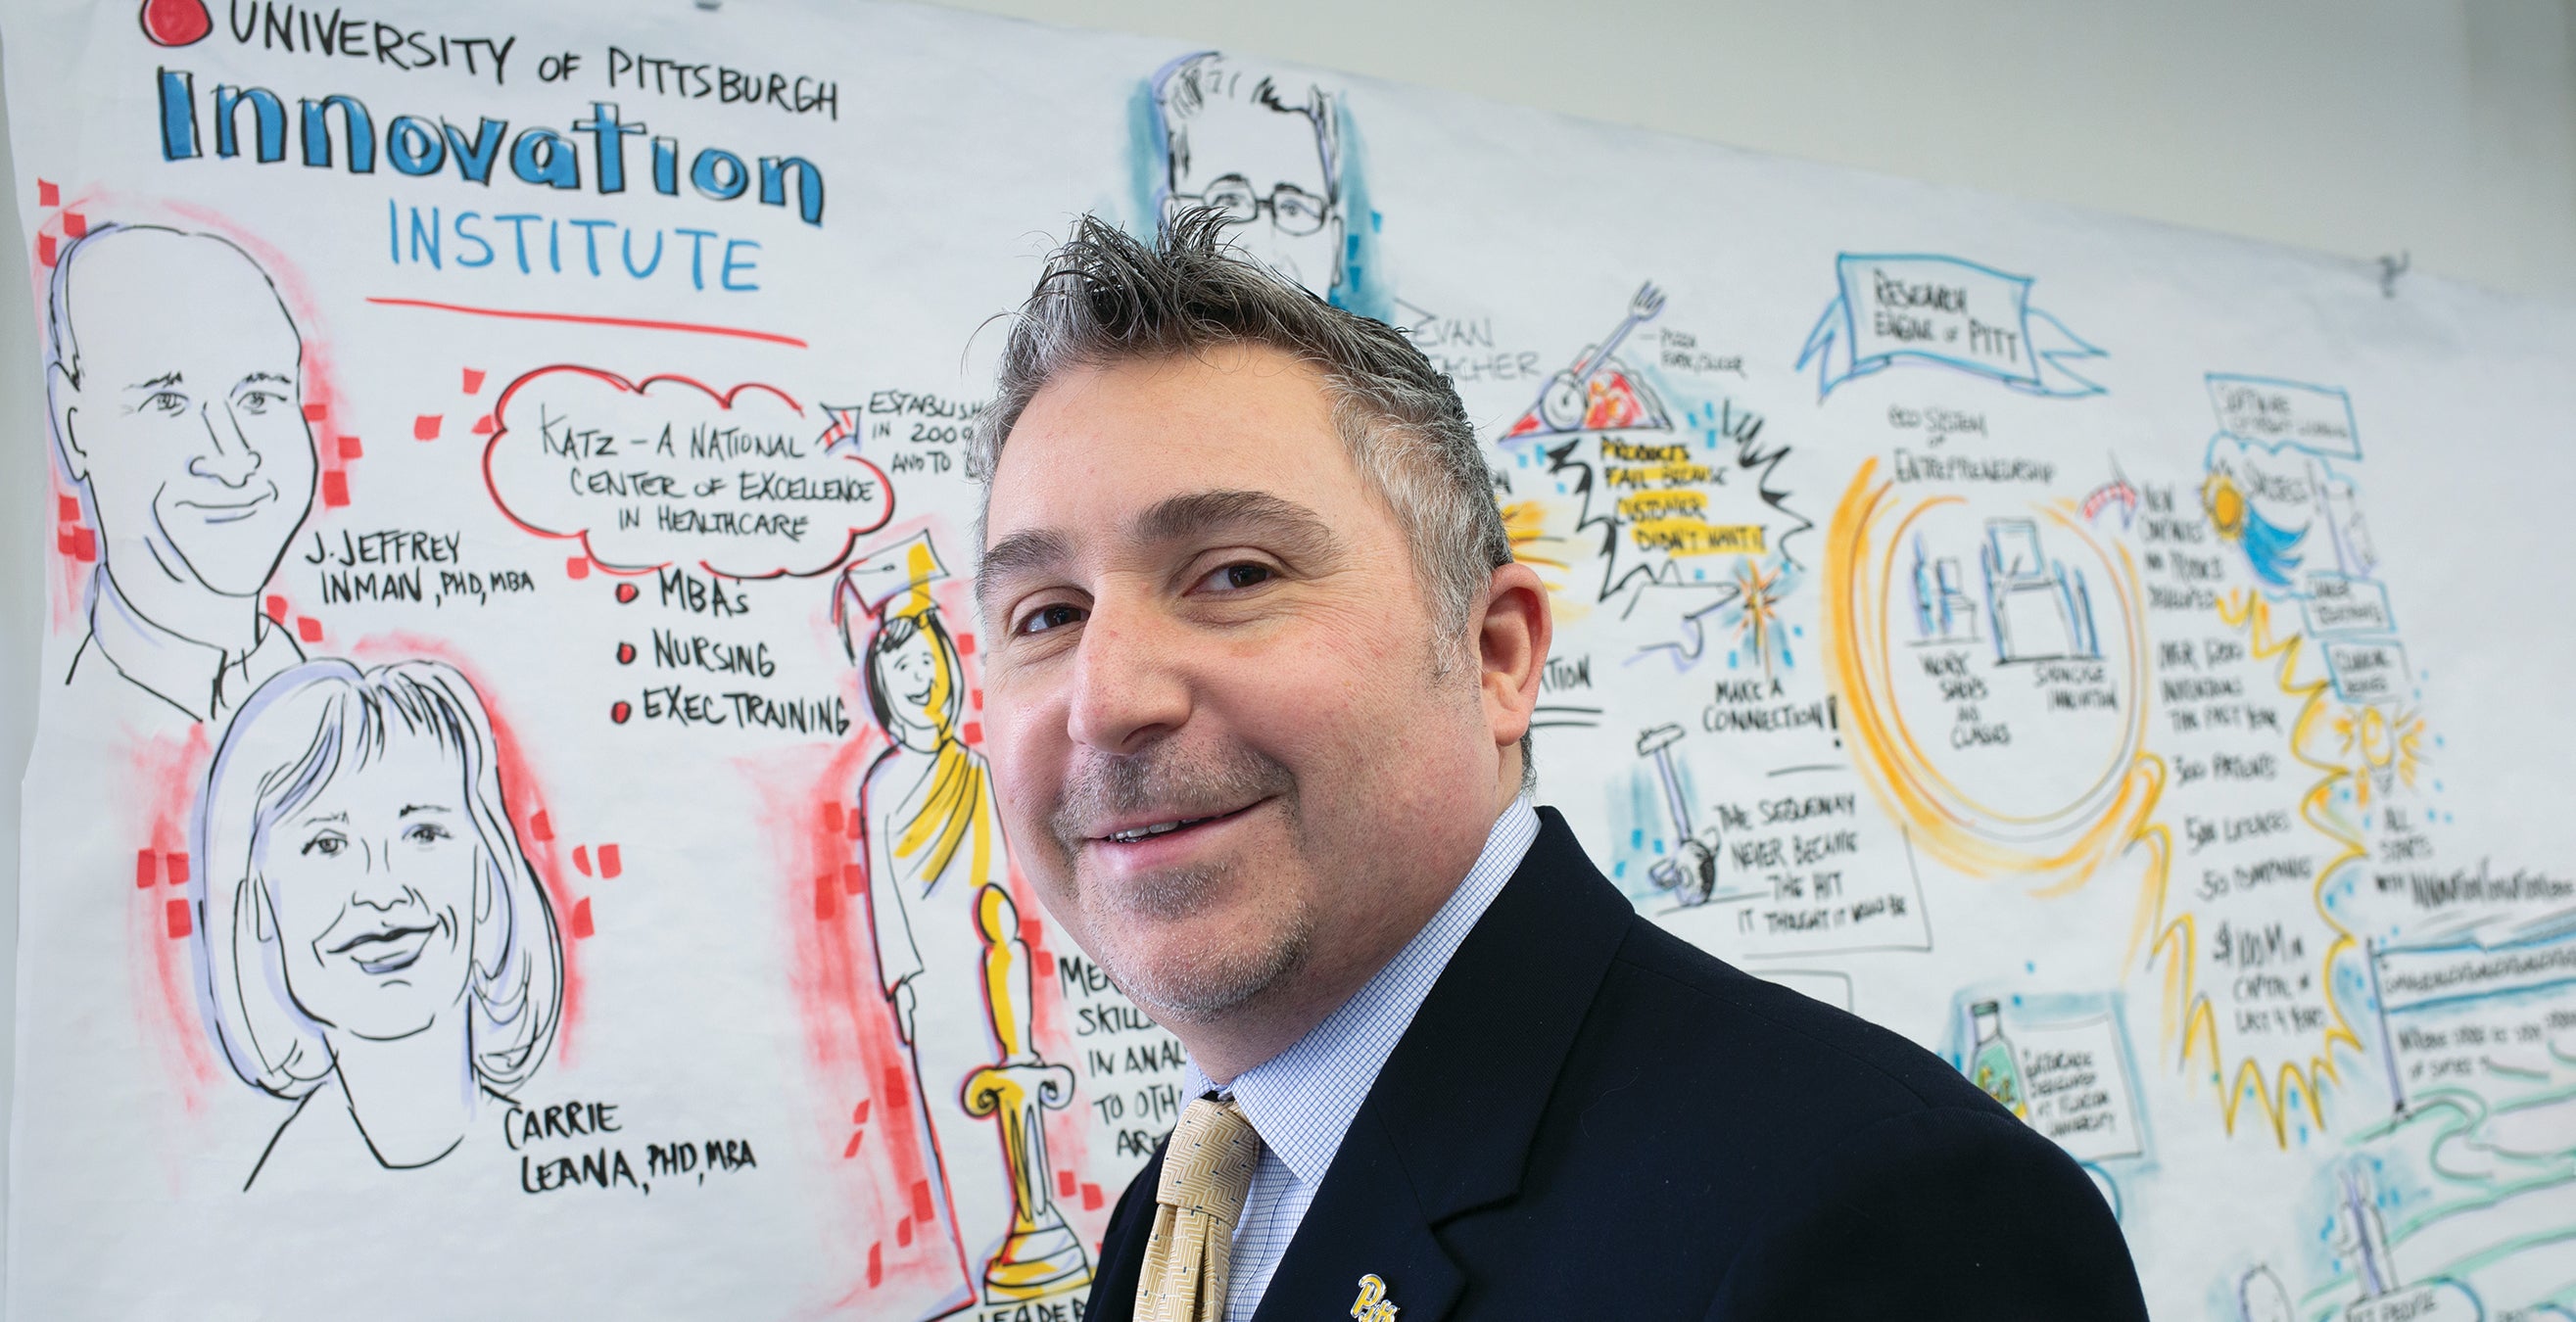 Evan Facher in front of colorful, cartoonish drawing of colleagues at the Innovation Institute.